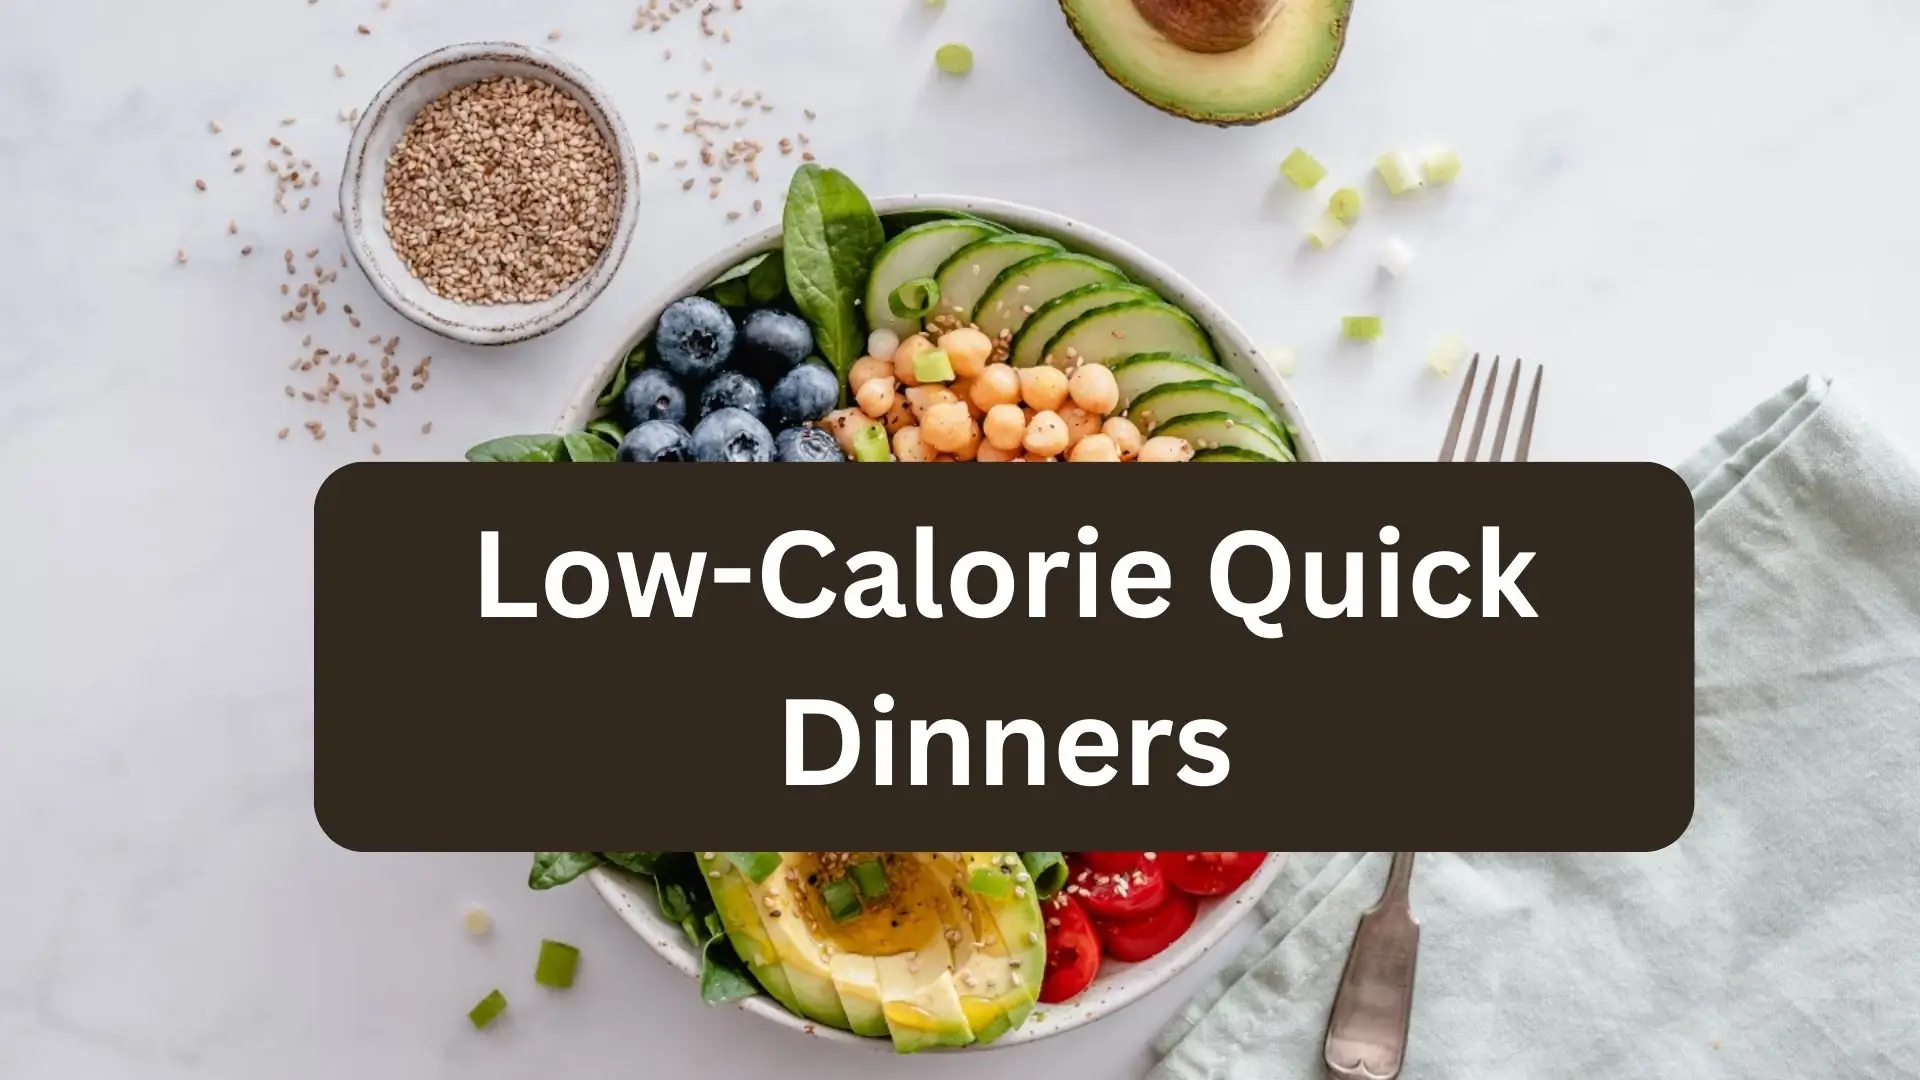 Light and Lovely: Mastering Low-Calorie Quick Dinners in a Flash!